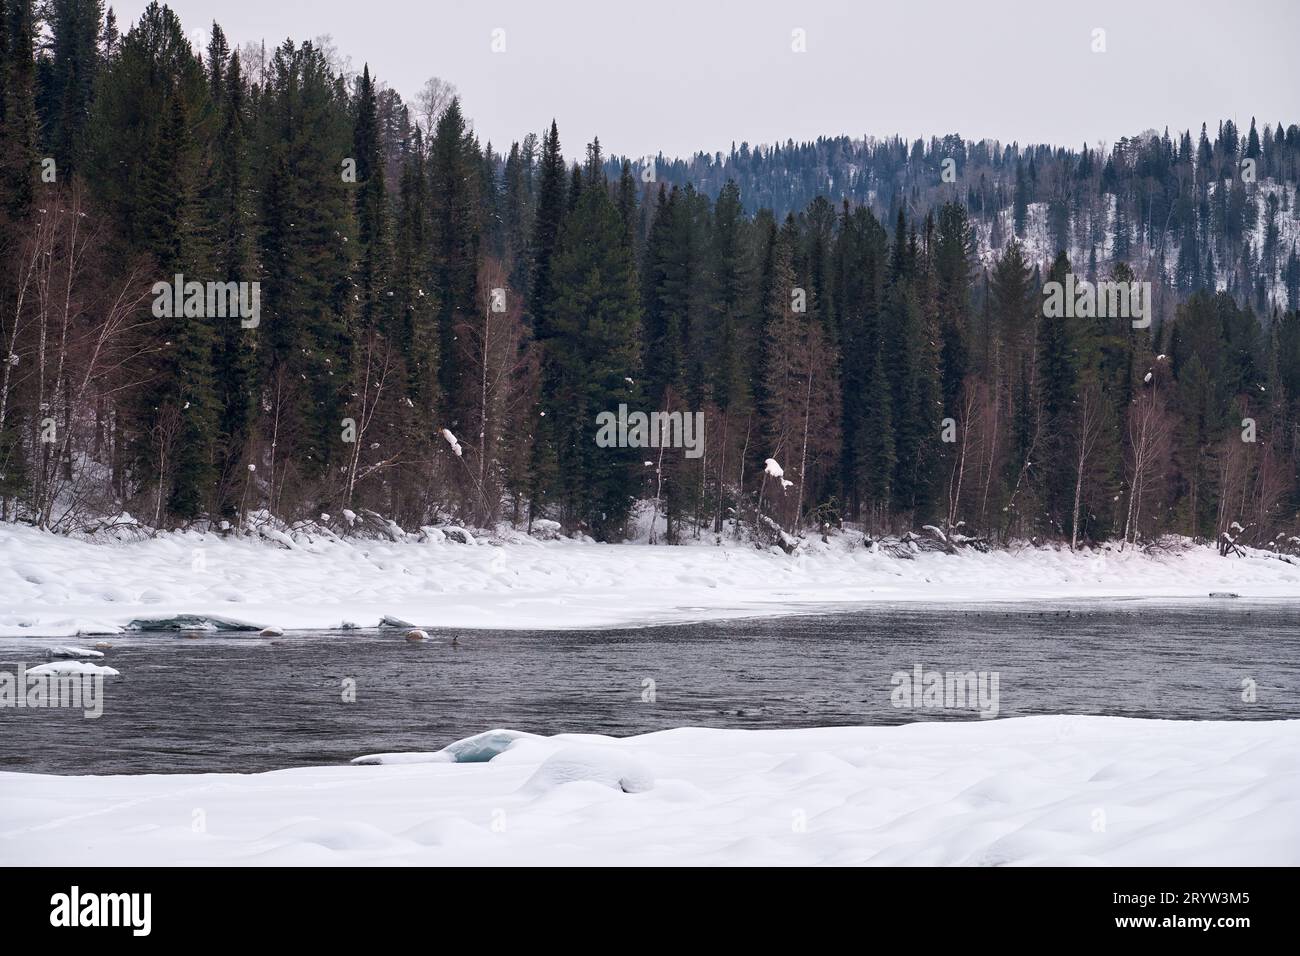 Altai river Biya in winter season. Banks of river are covered by ice and snow. Stock Photo